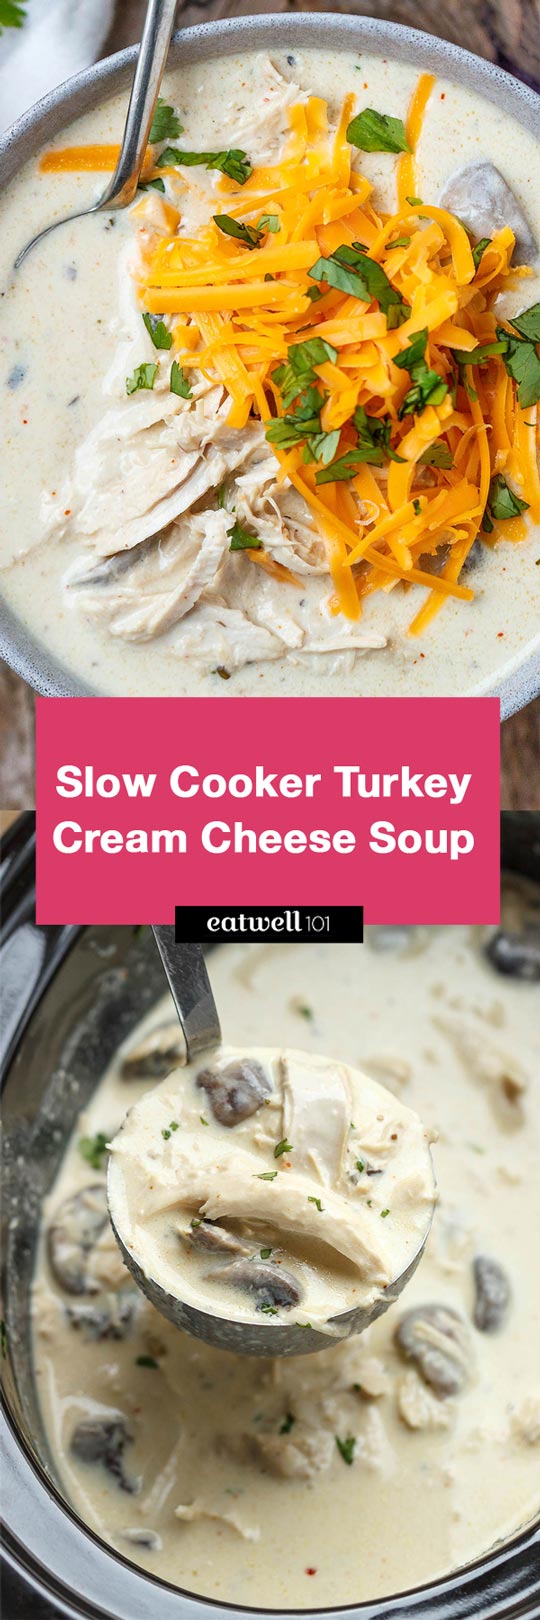 Slow Cooker Turkey Cream Cheese Soup - Rich and velvety, you'll enjoy every spoonful of this hearty turkey cream cheese soup!